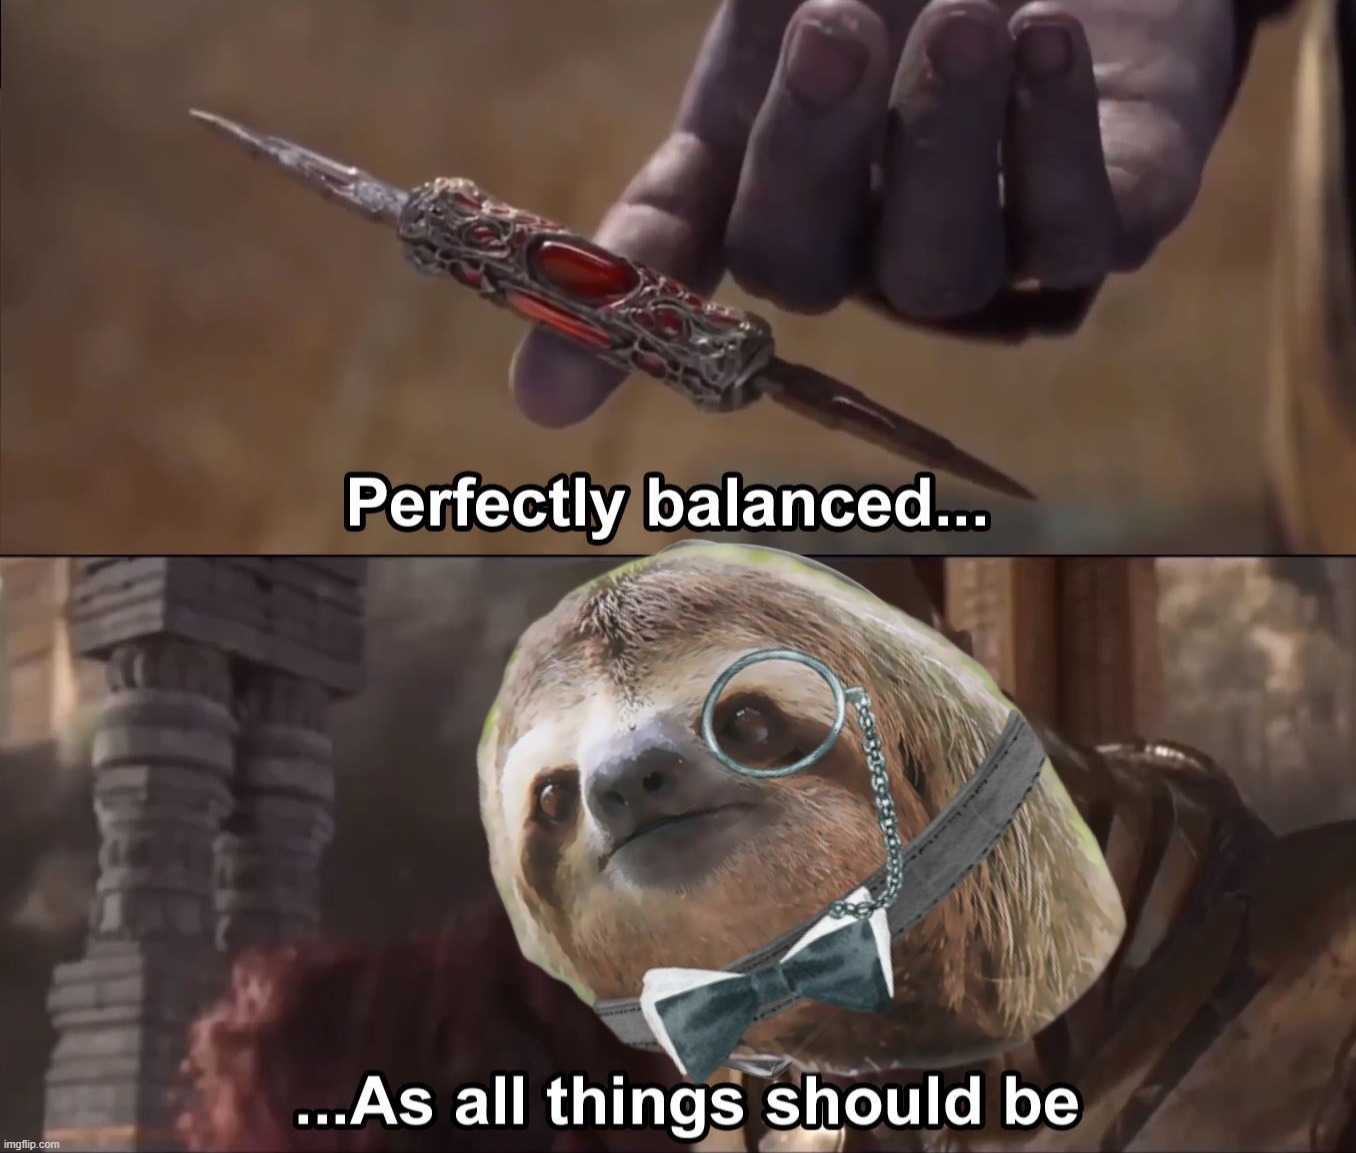 Monocle sloth perfectly balanced as all things should be | image tagged in monocle sloth perfectly balanced as all things should be | made w/ Imgflip meme maker